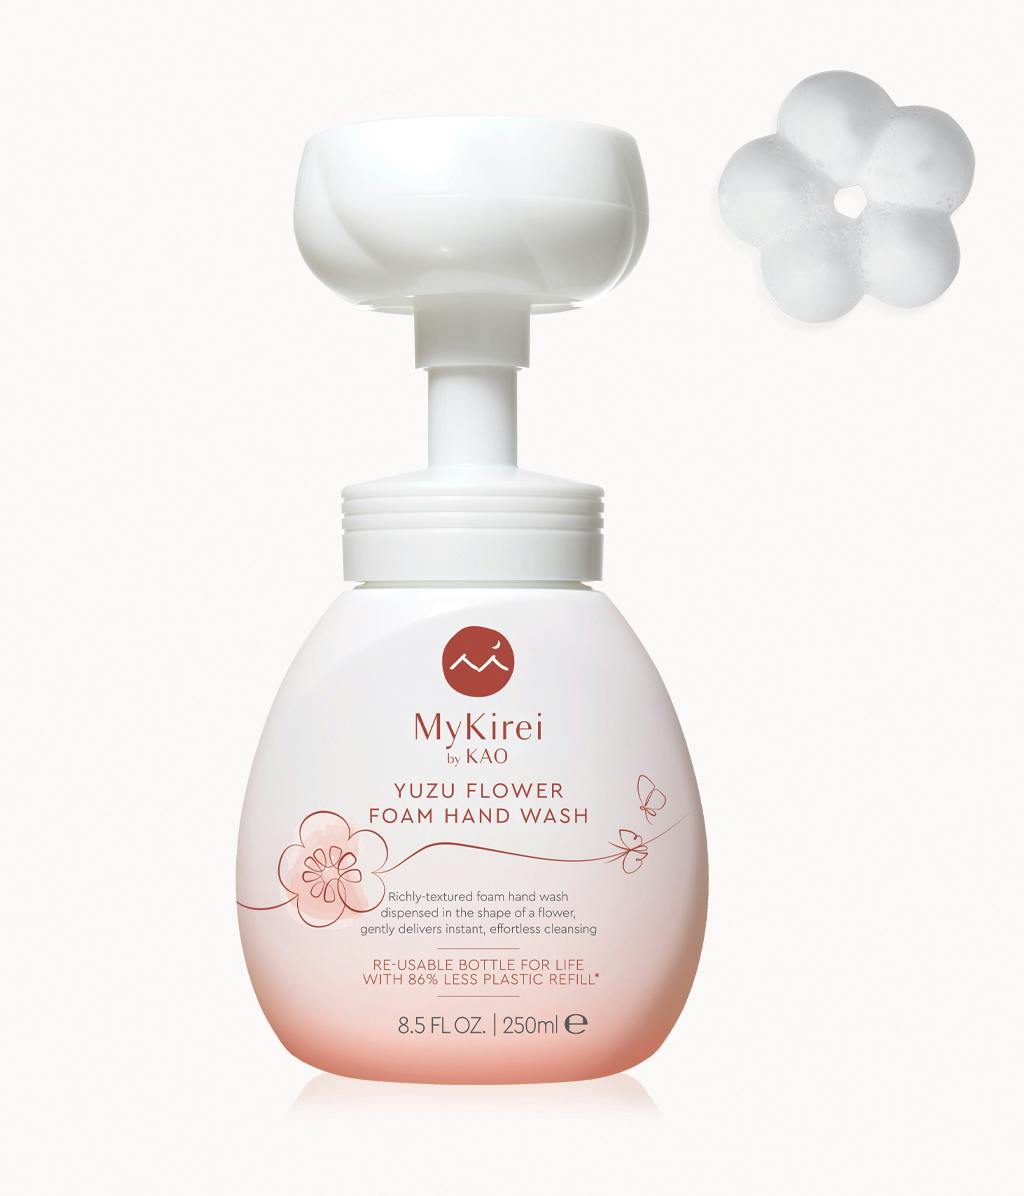 MyKirei's Yuzu Flower Foam Hand Wash comes in a reusable life bottle that distributes soap in the form of flowers.